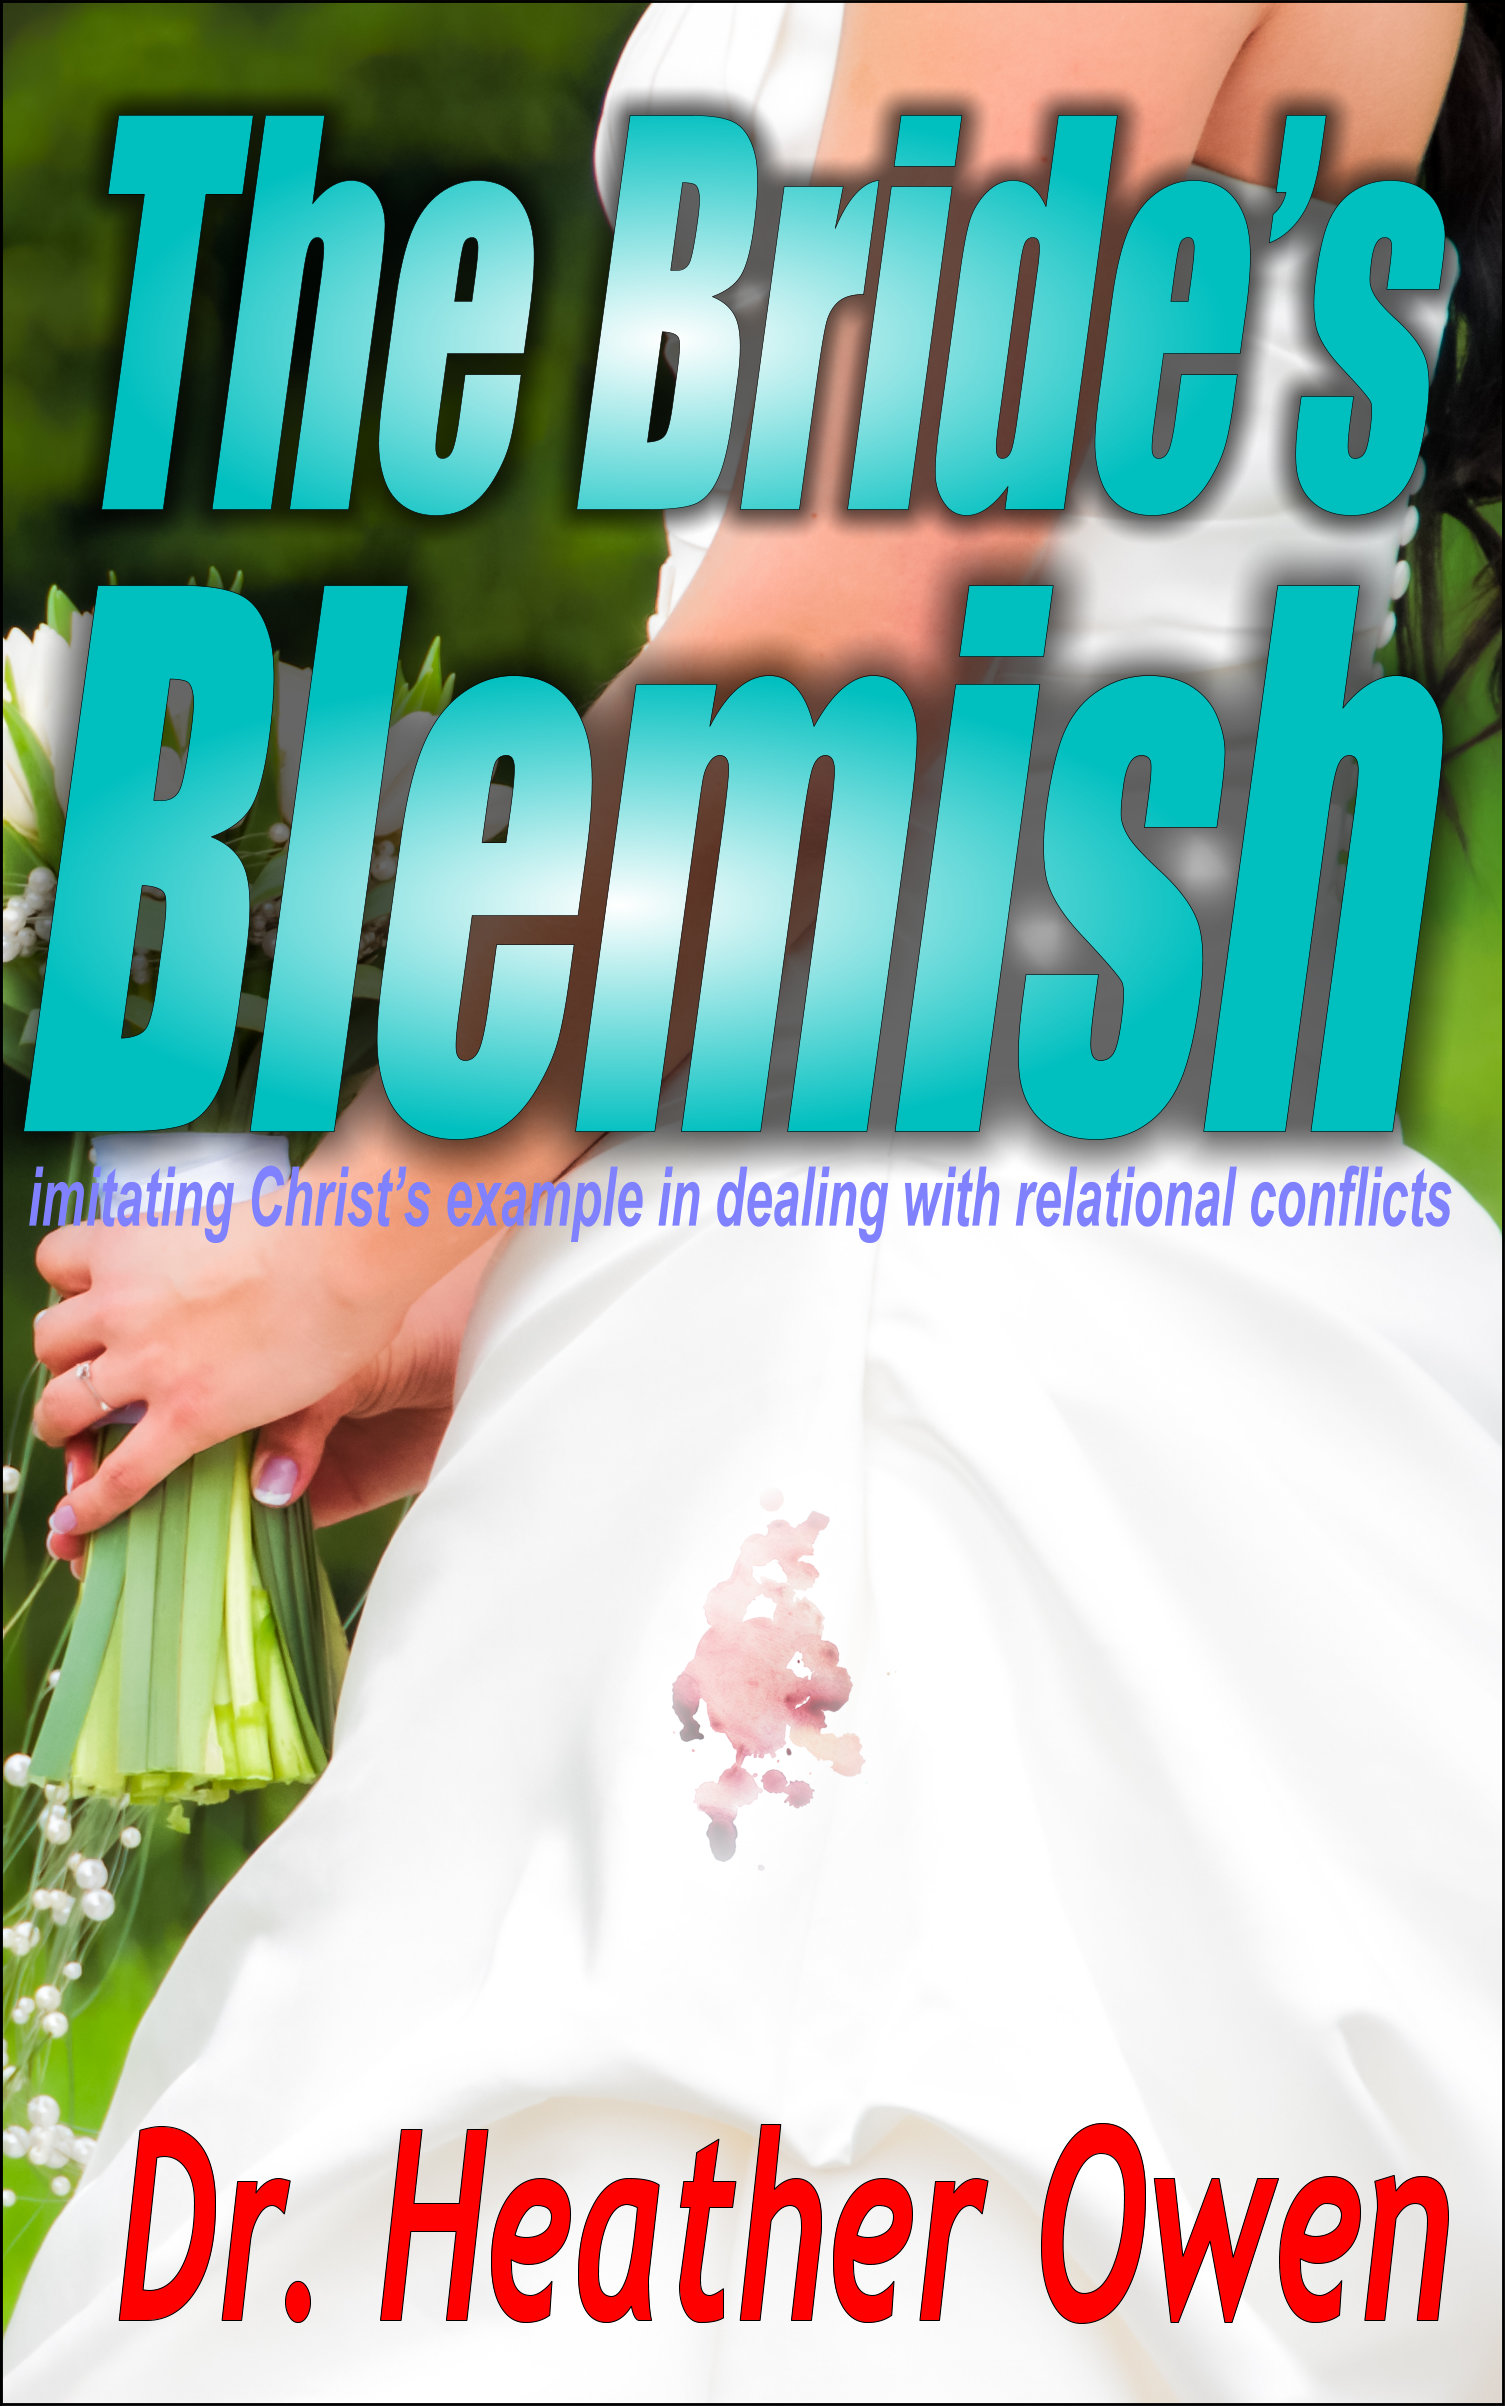 Buy The Bride's Blemishd from Amazon